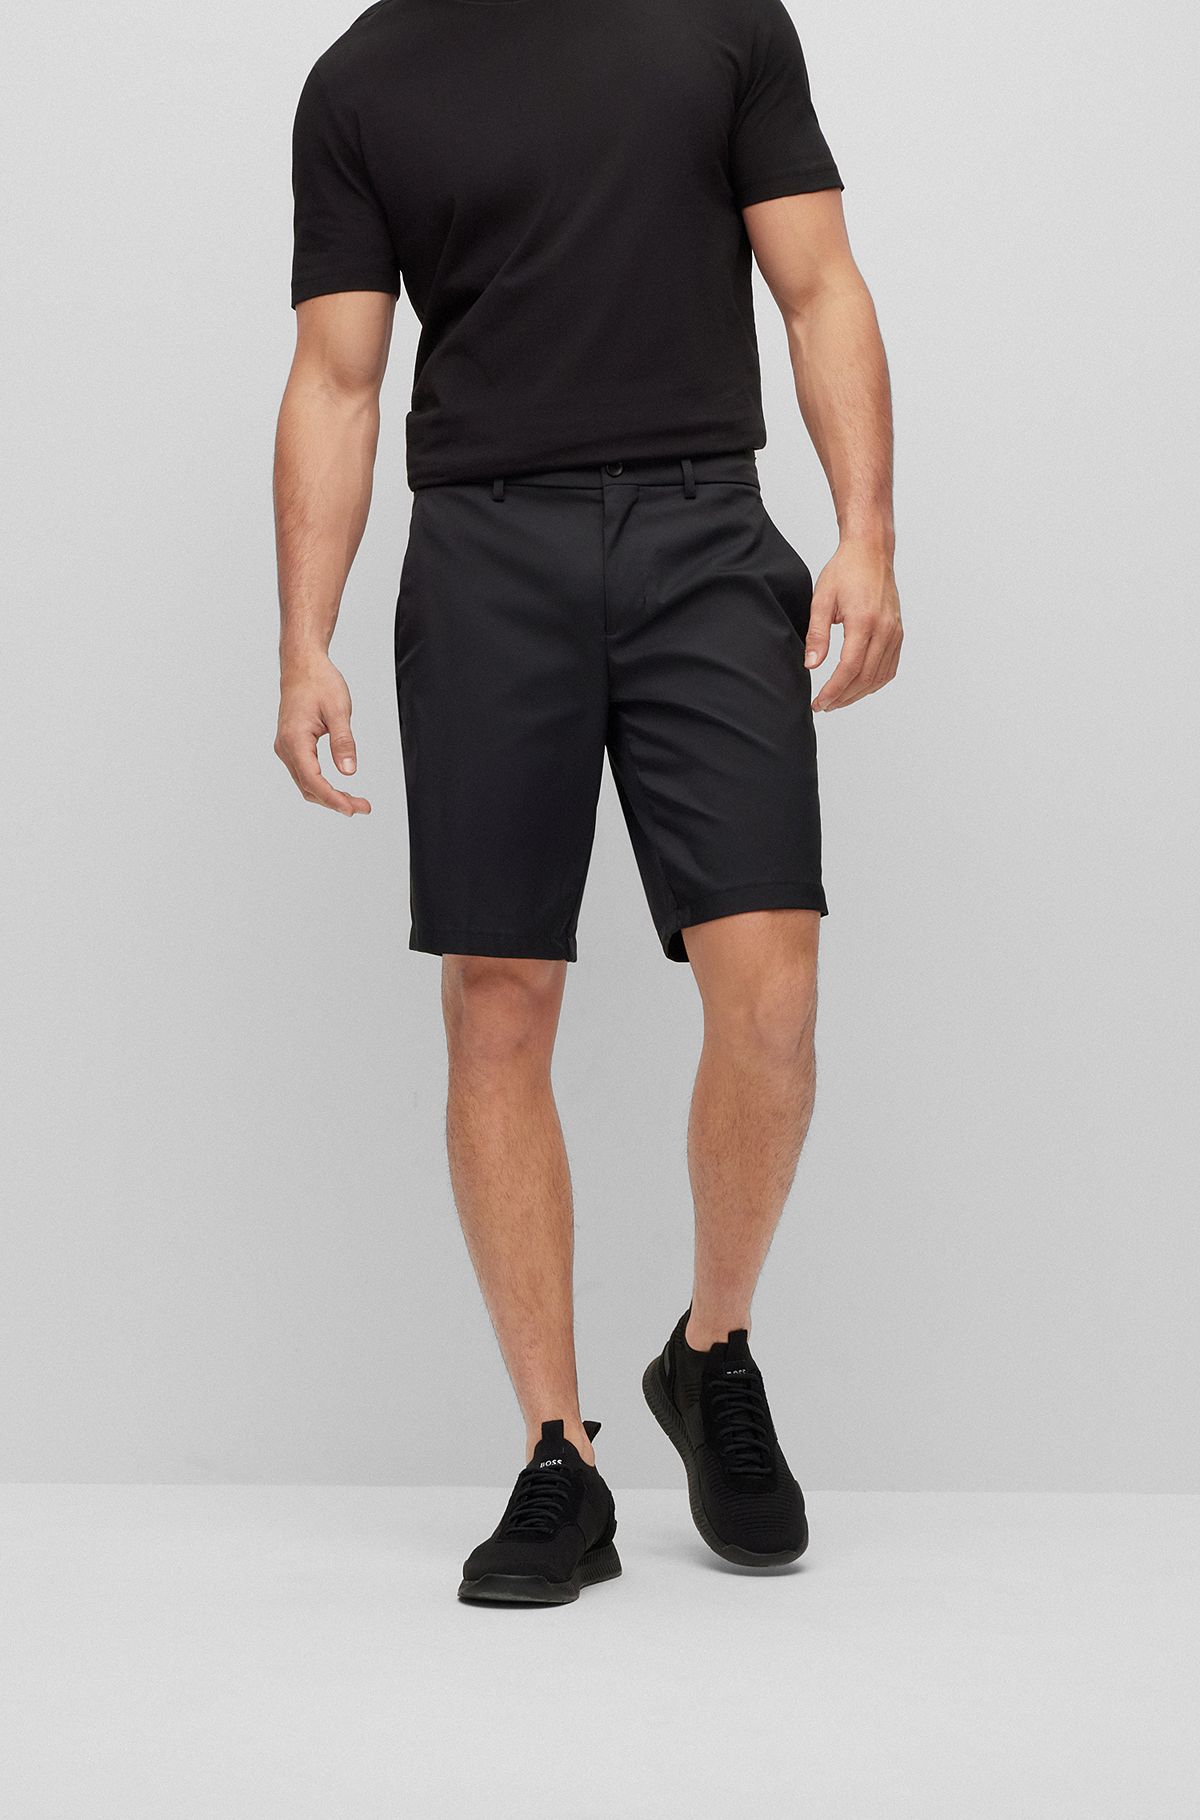 BOSS by HUGO BOSS Authentic 10208539 Sweat Shorts in Black for Men